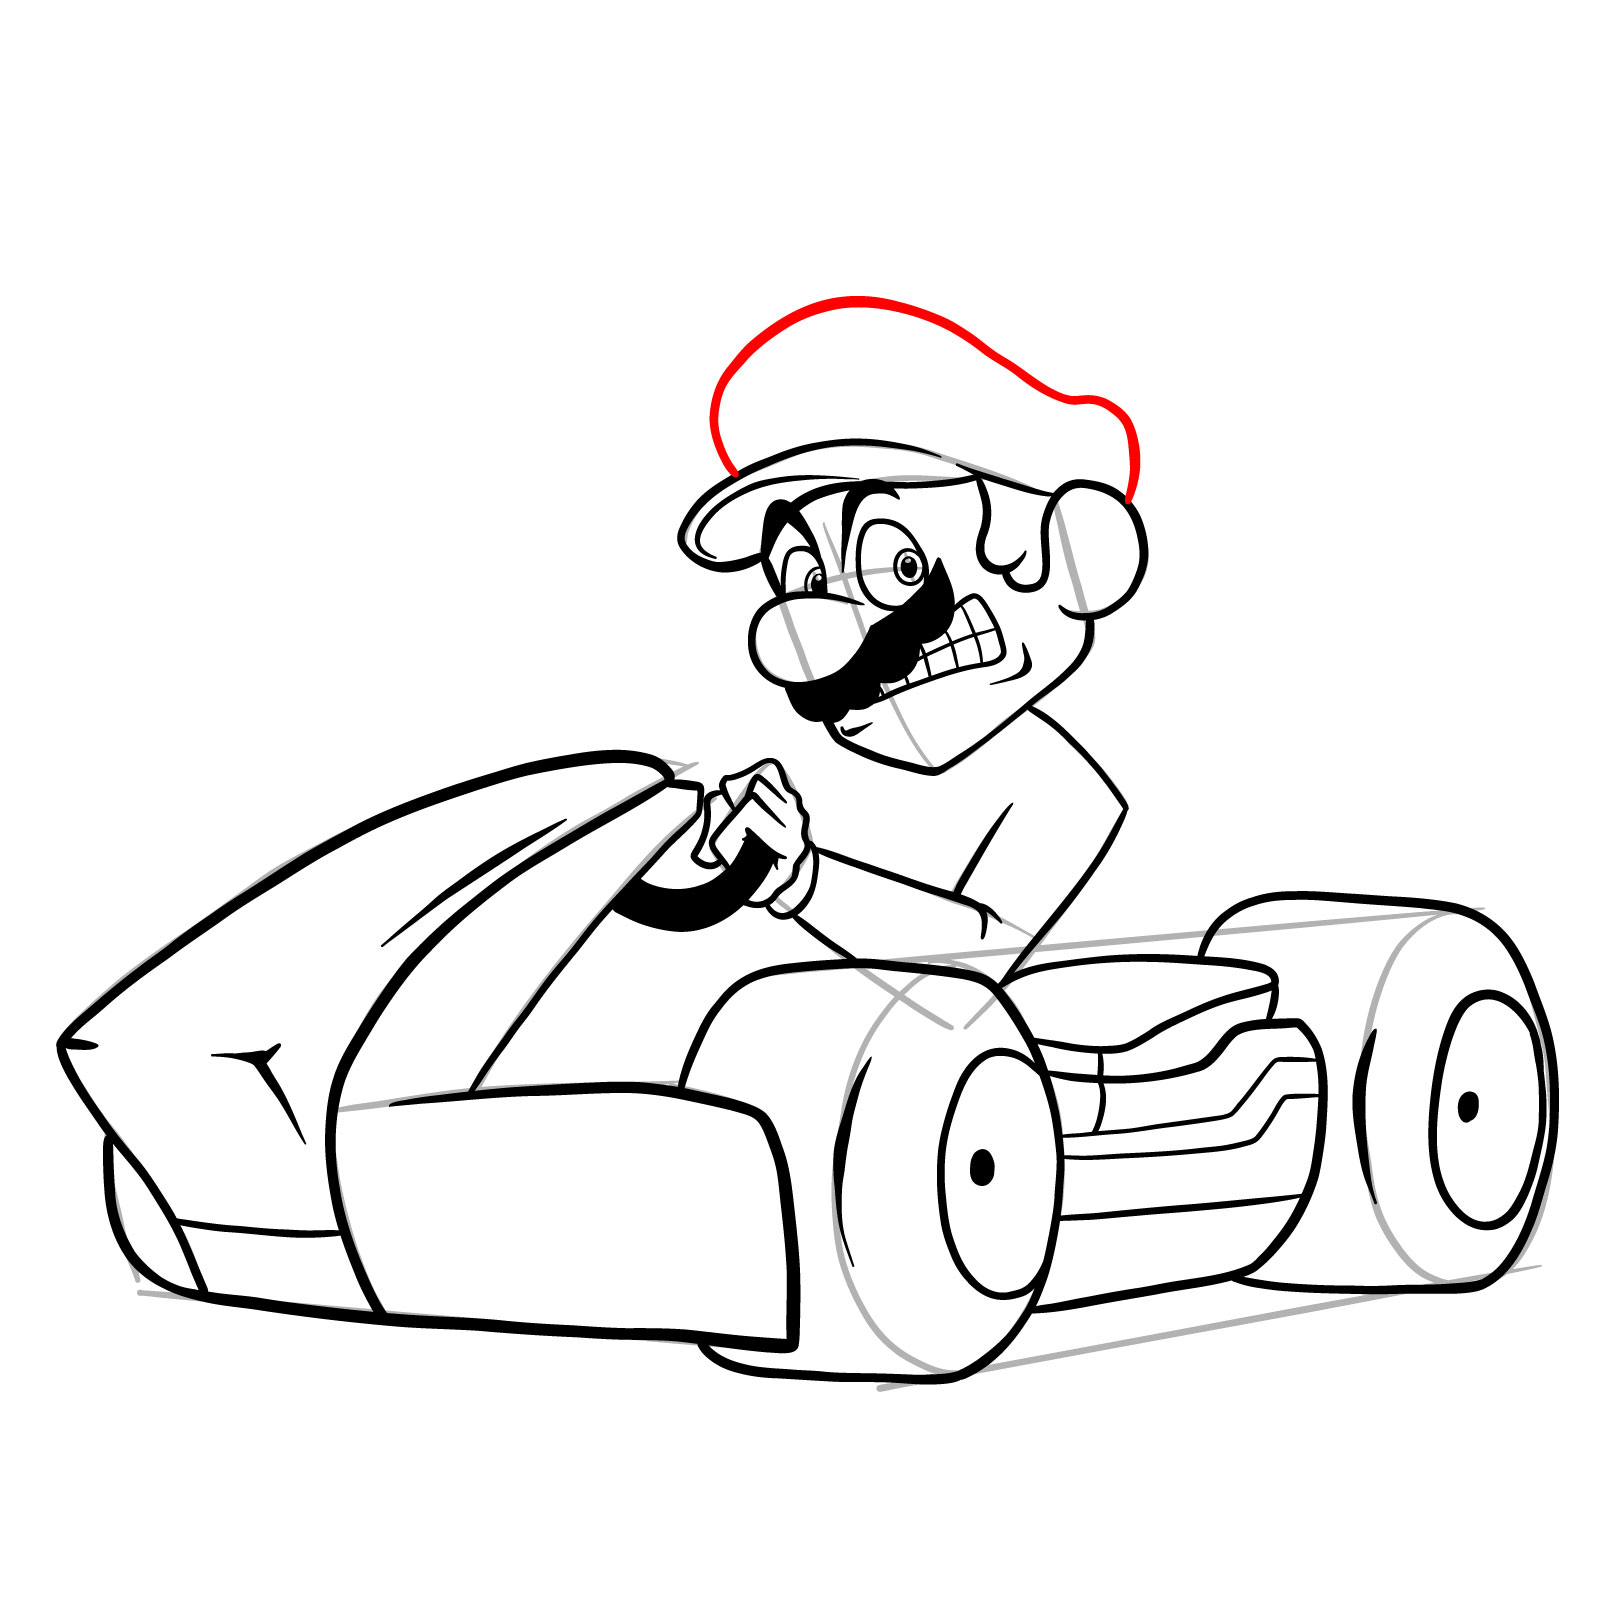 How to draw Race Traitors Mario - step 30